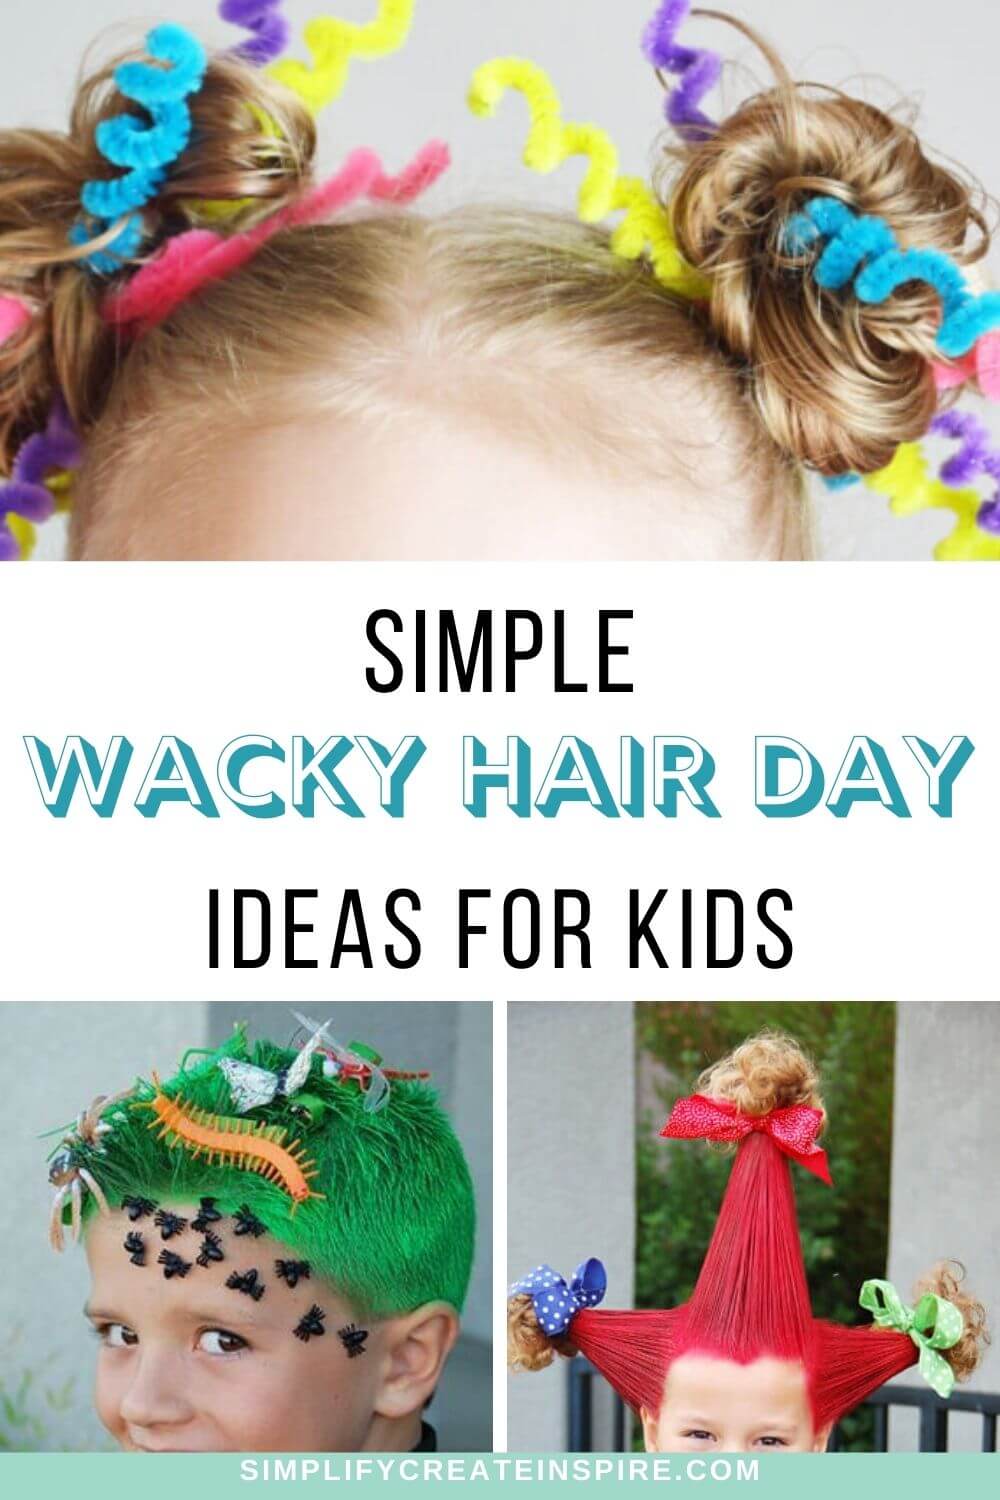 Easy crazy hair day ideas for boys and girls